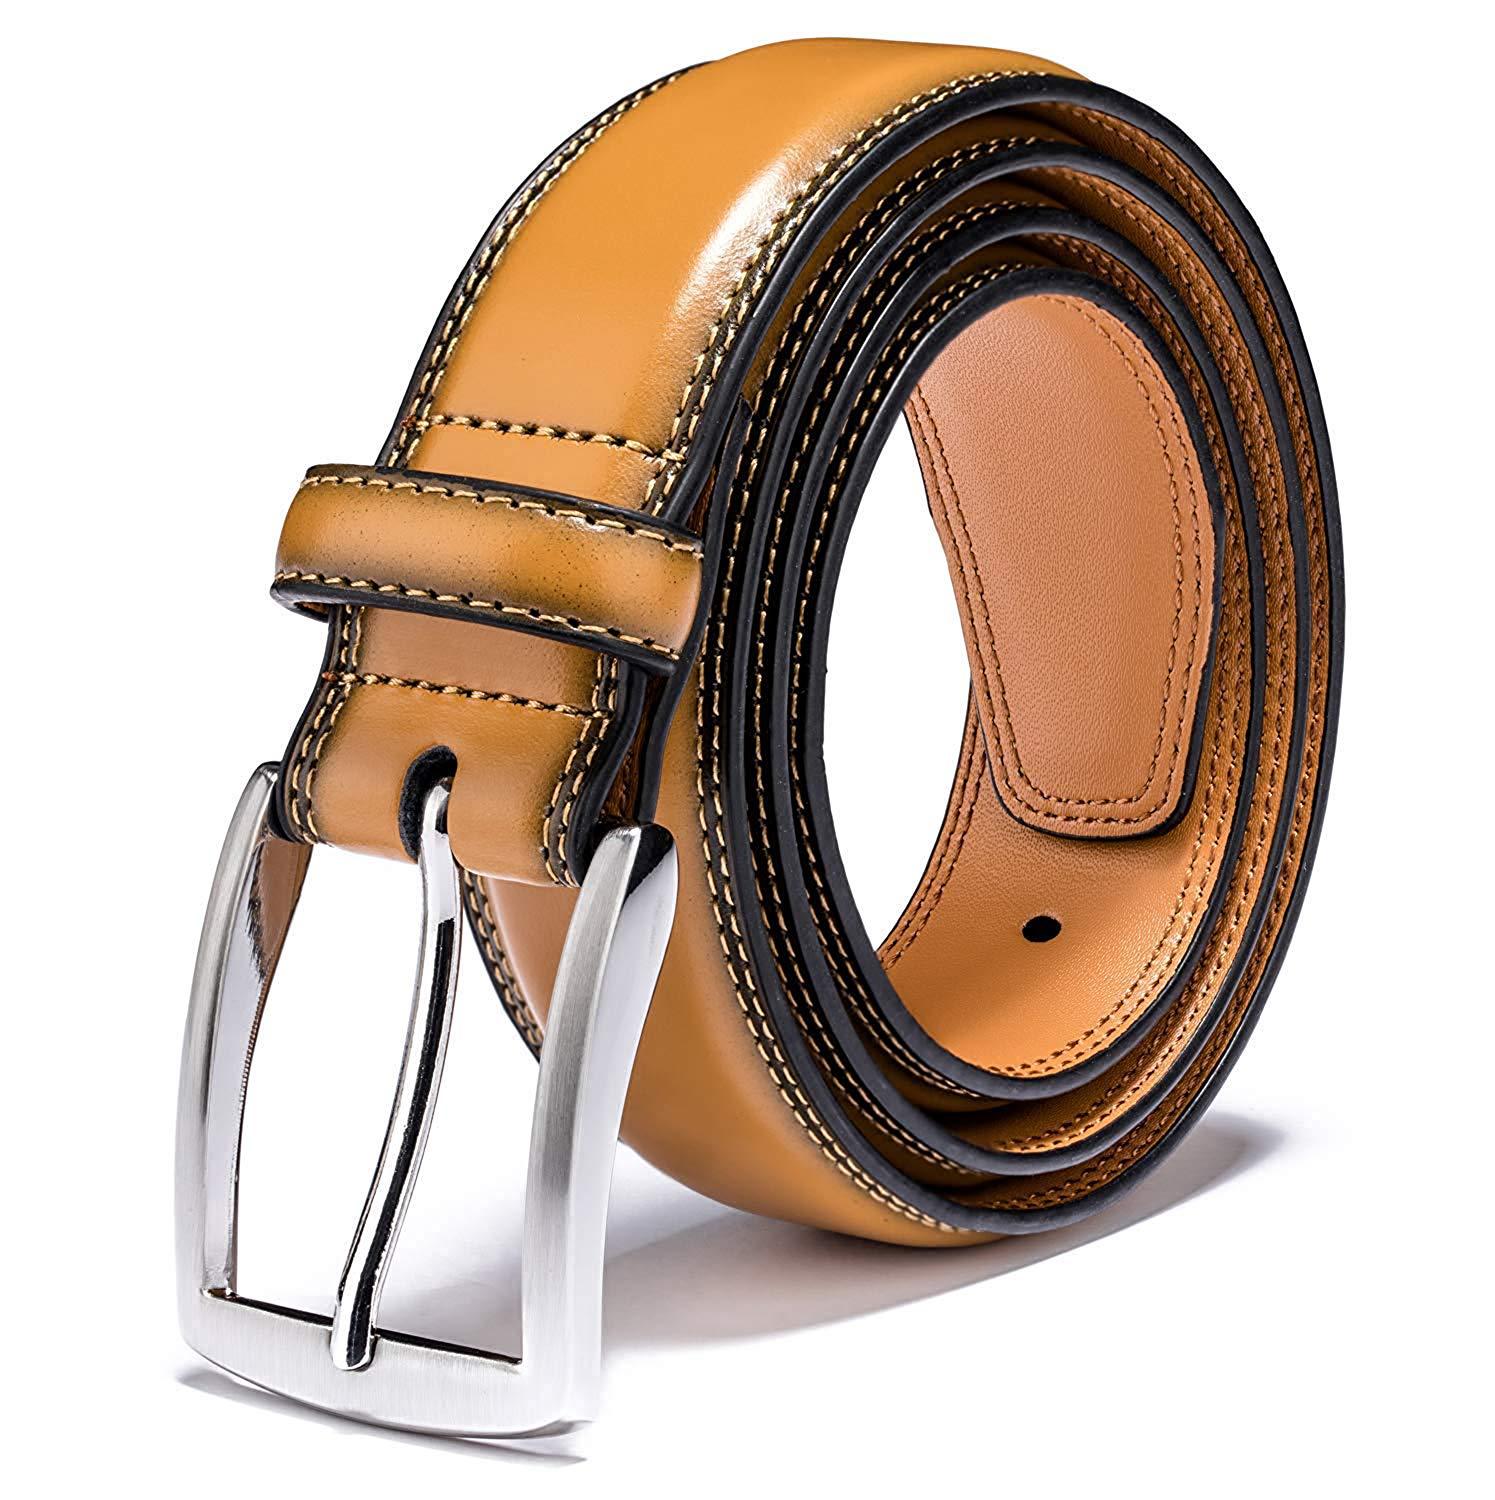 Men's Belt, Genuine Leather Dress Belts for Men with Single Prong Buckle- Classic & Fashion Design for Work Business and Casual (Brown, 40in) - image 1 of 6